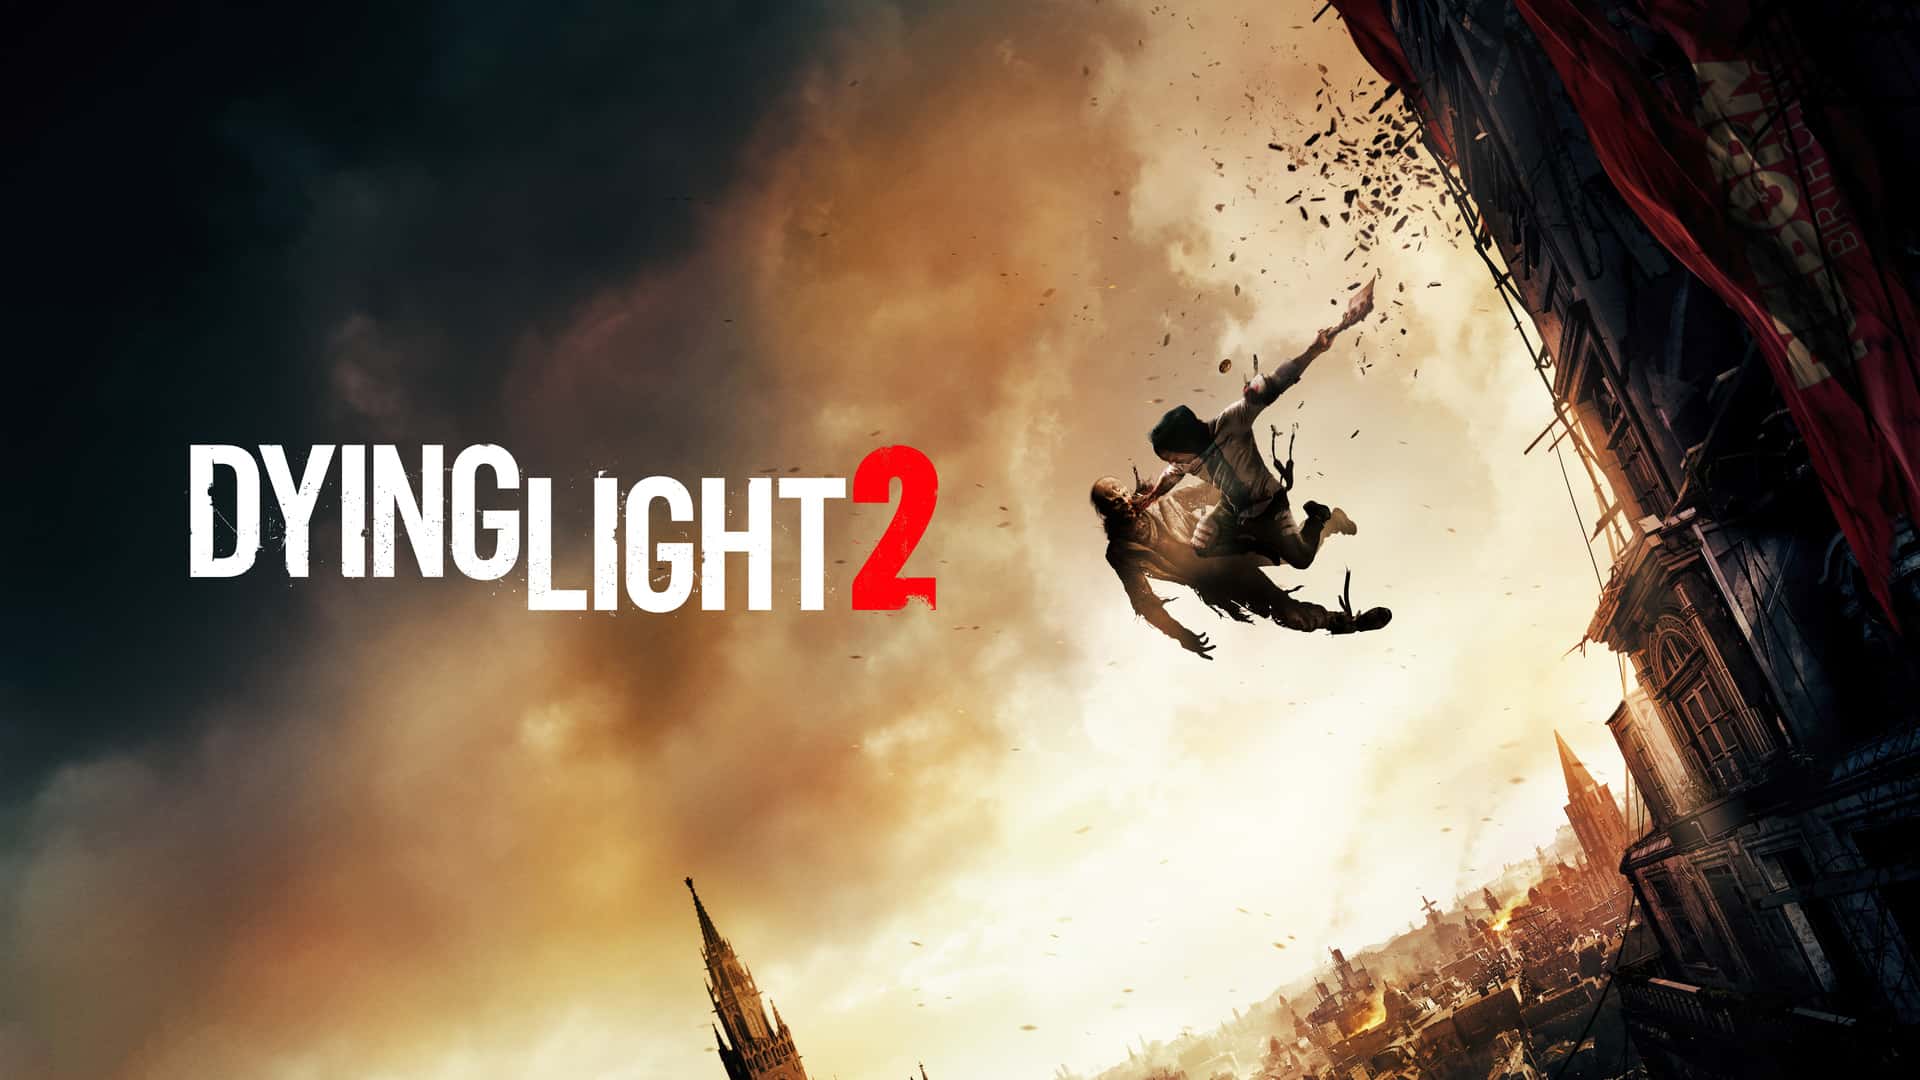 Techland Once Again Teams Up With Koch Media To Deliver Dying Light 2 In Europe And Australia